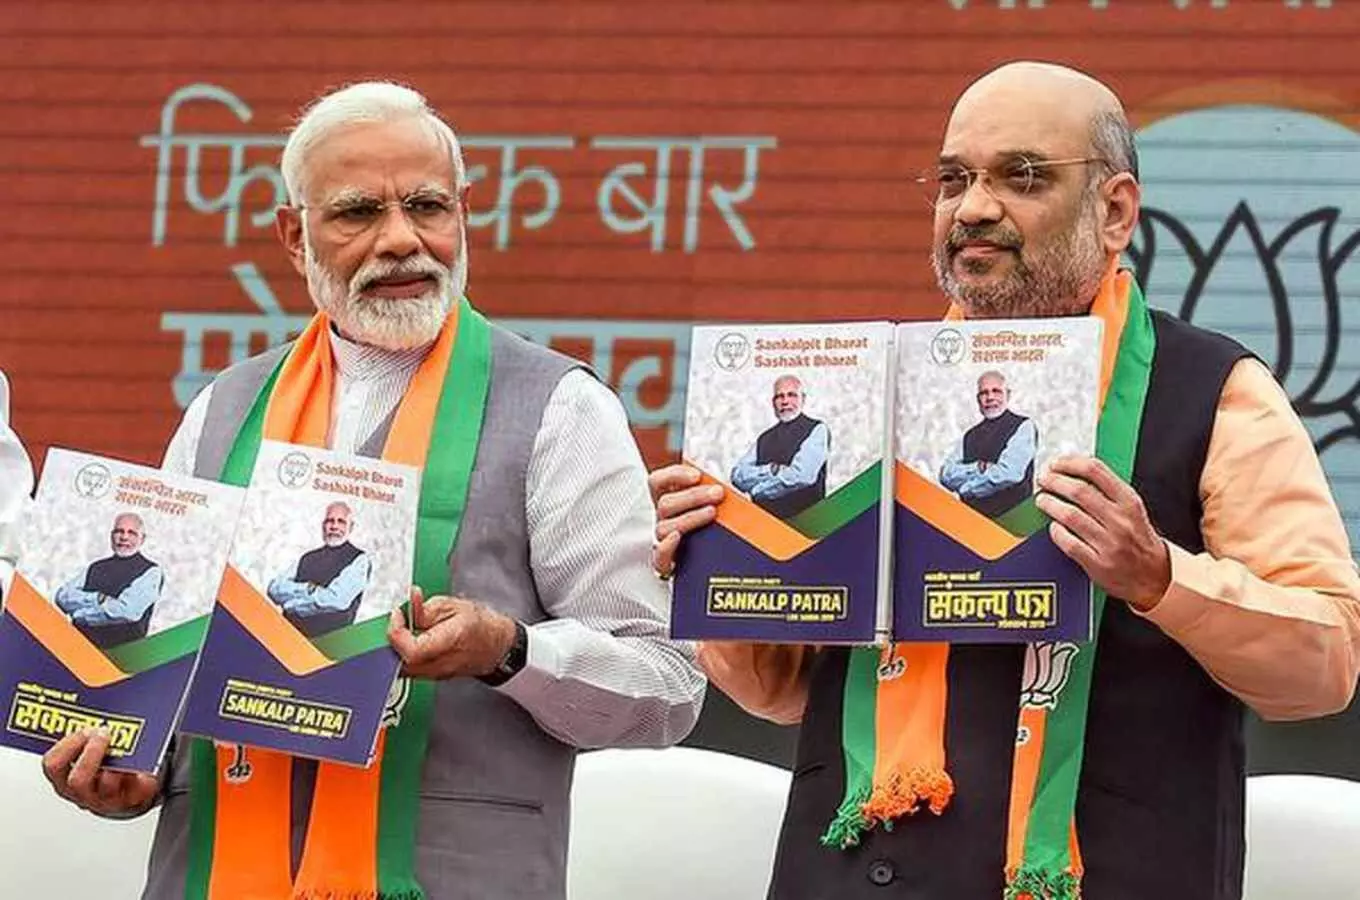 gujarat assemblly elections 2022 bjp manifesto released today live updates govt job free electricity